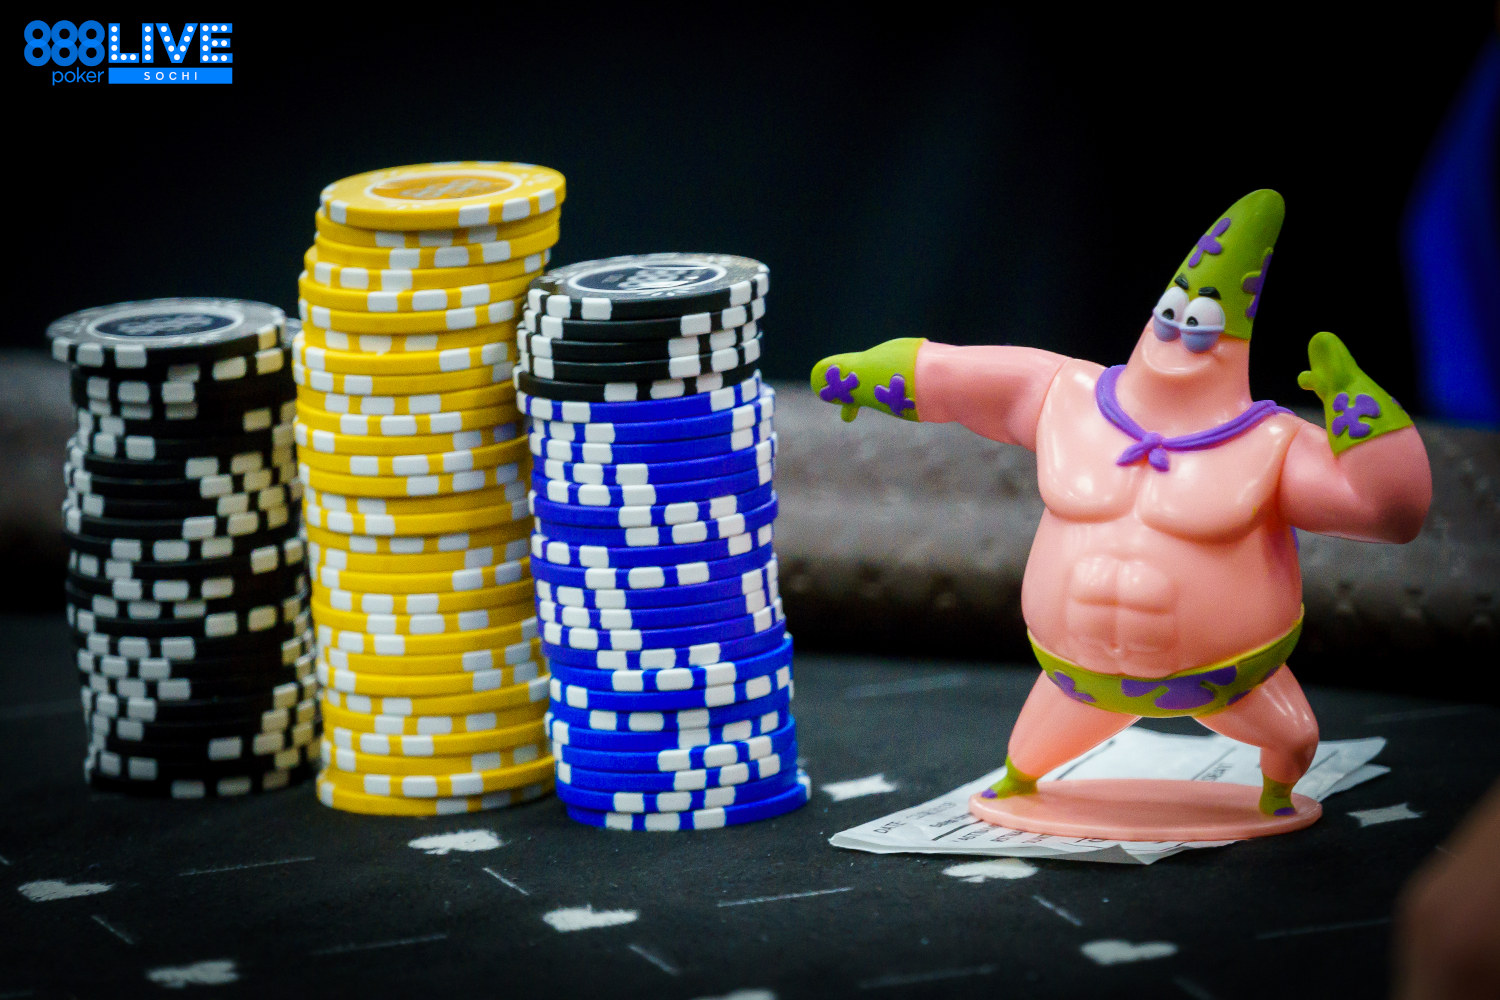 Top 5 Reasons You're Losing in Poker - Playing Too High